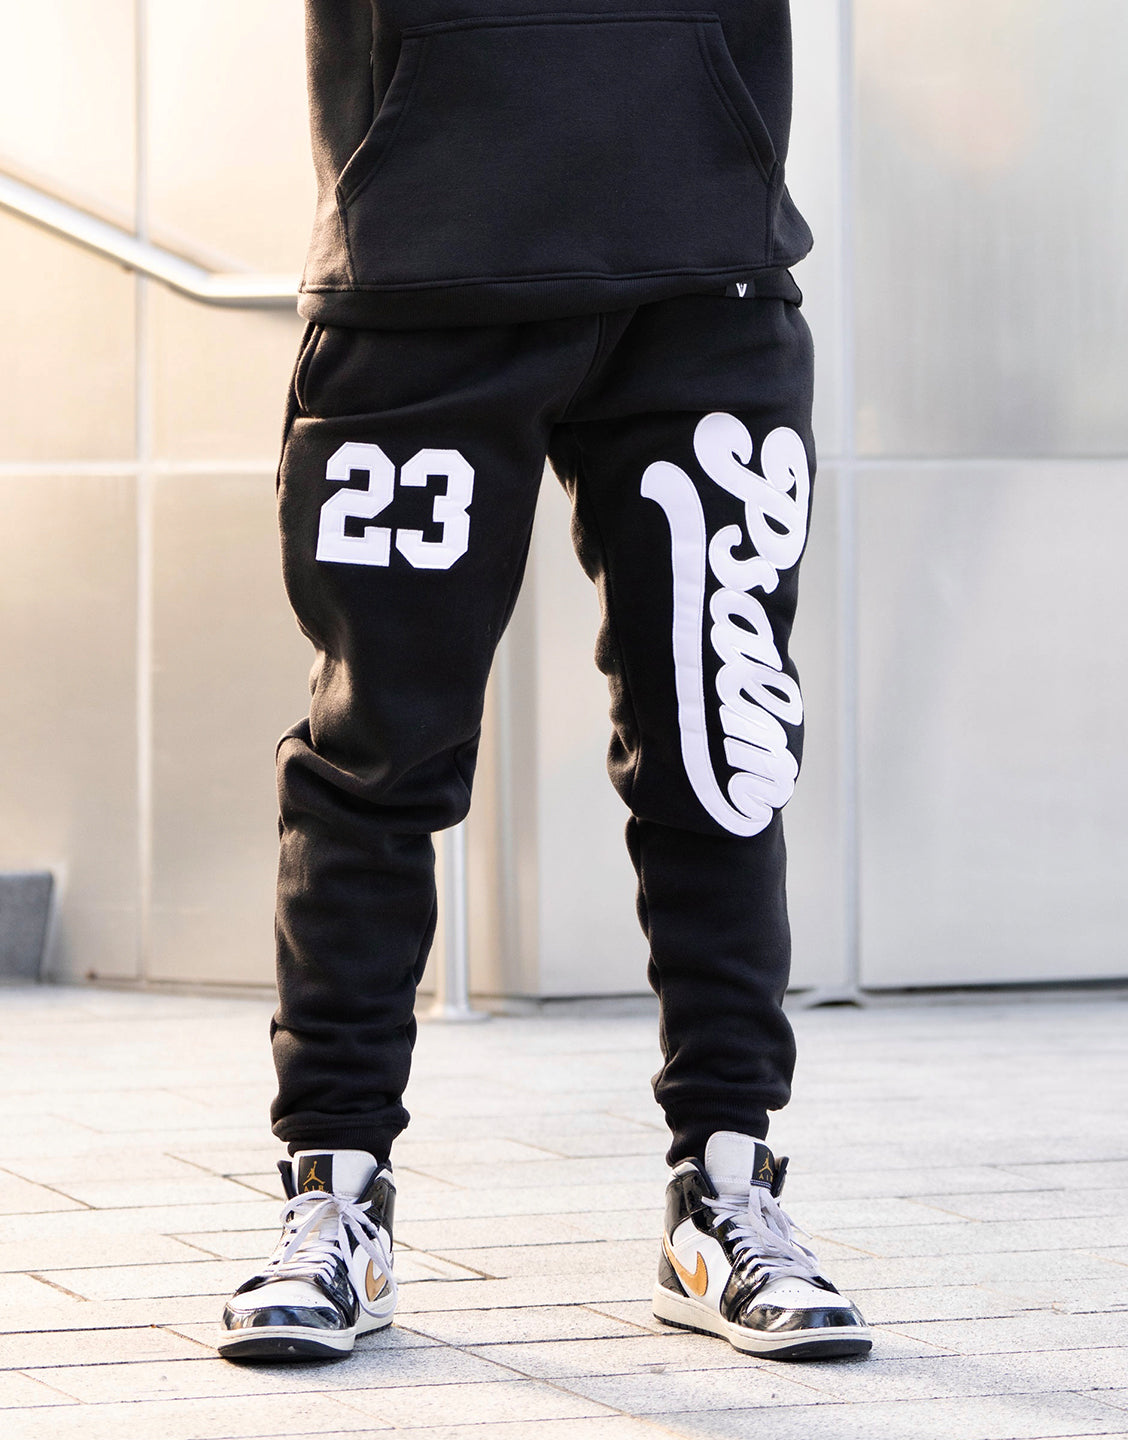 Japanese Hip Hop Graphic Printed Sweatpants For Men Stylish Long Black  Streetwear Pants For Spring 210930 From Kong003, $17.66 | DHgate.Com